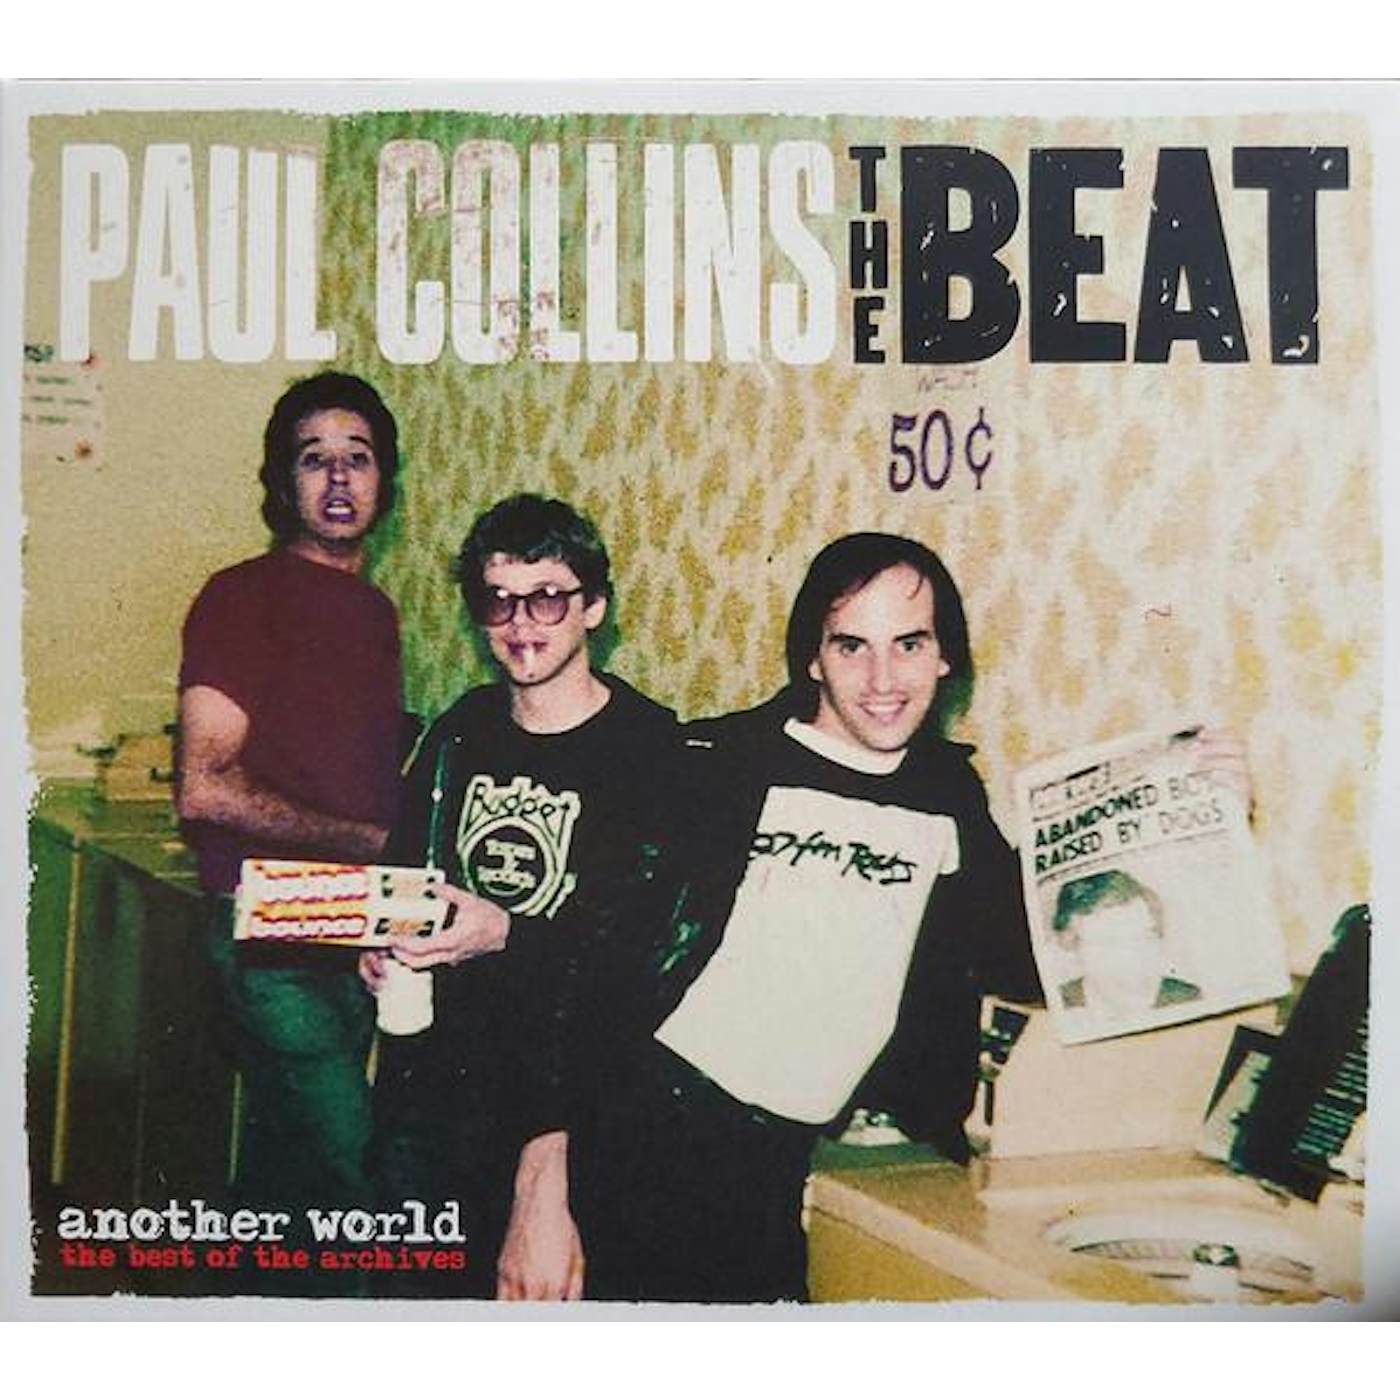 Paul Collins Beat ANOTHER WORLD - THE BEST OF THE ARCHIVES CD